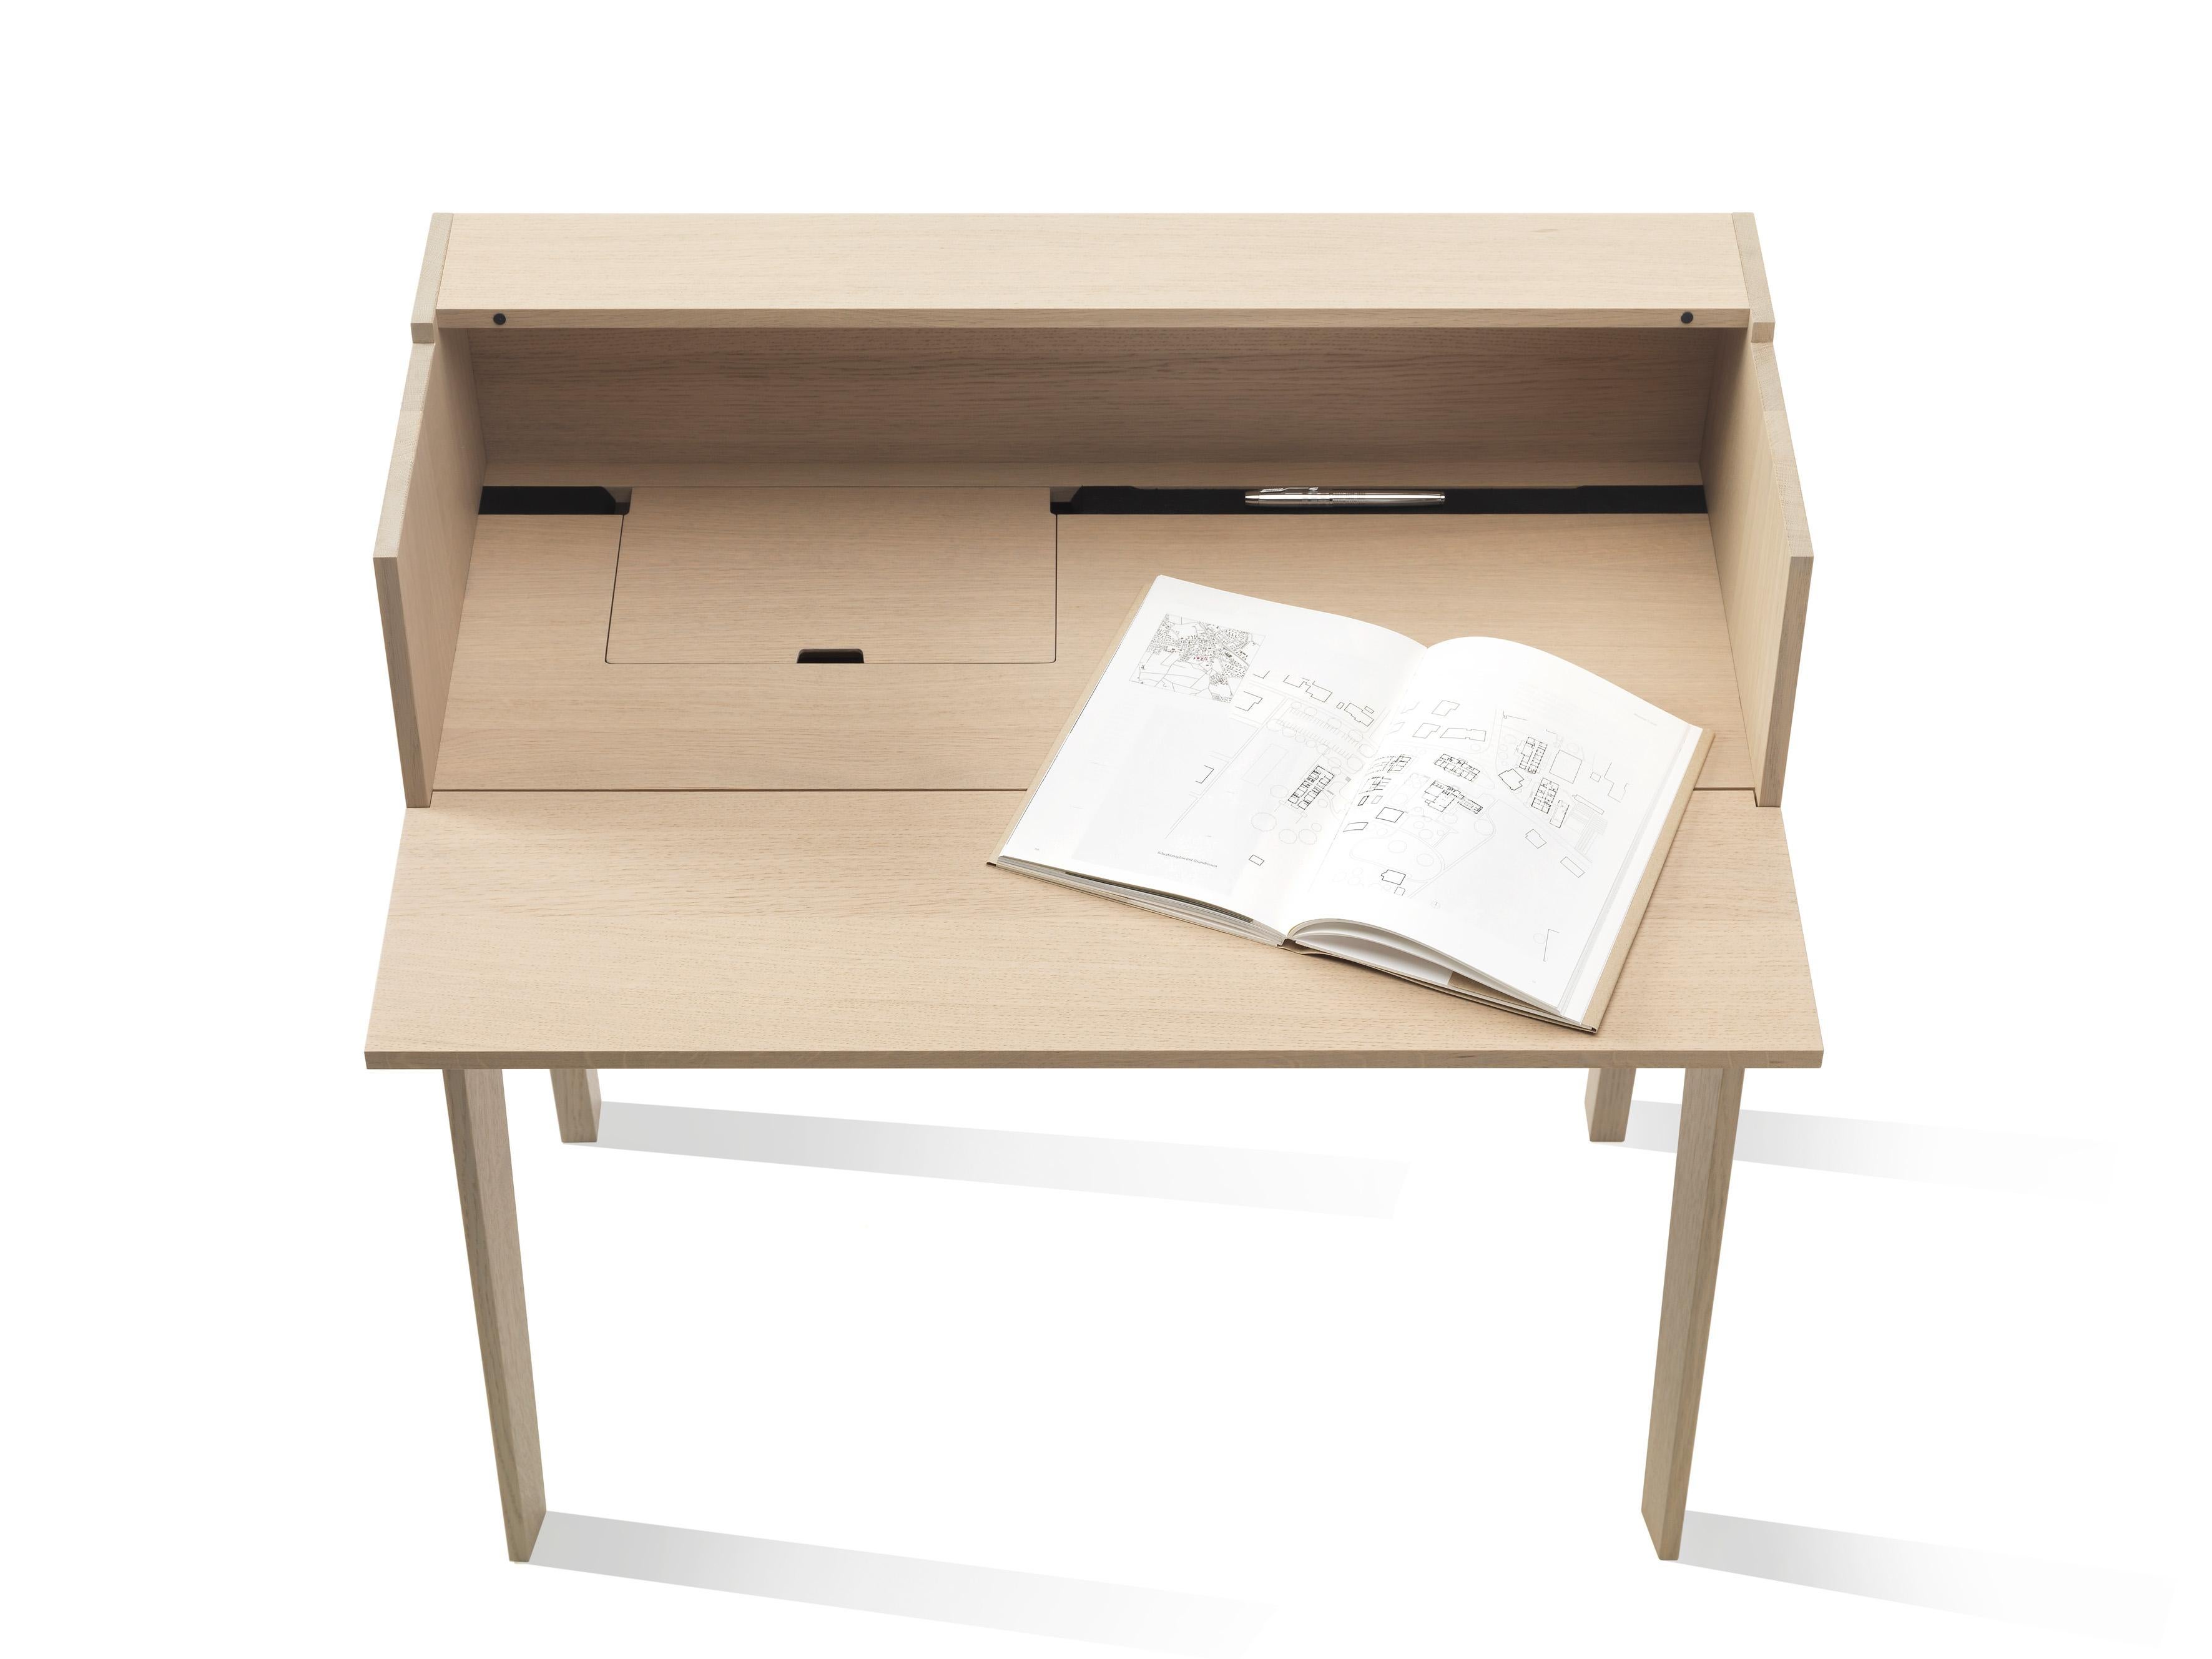 Stained Timeless Writing Desk 'At-At by Tomoko Azumi' with Storage, Swiss Made For Sale